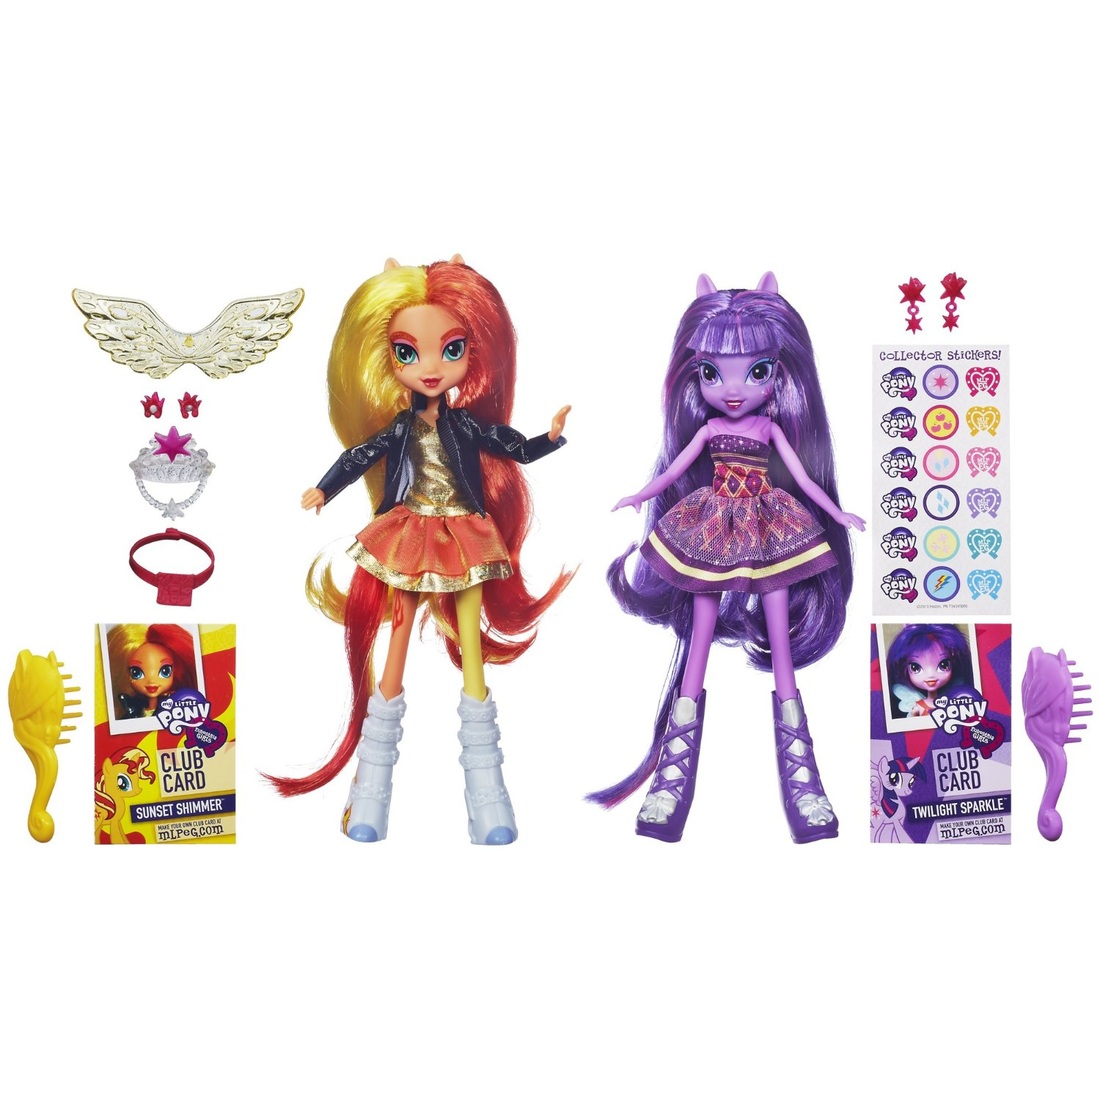 MY LITTLE PONY EQUESTRIA GIRLS SUNSET SHIMMER AND TWILIGHT SPARKLE FIGURES